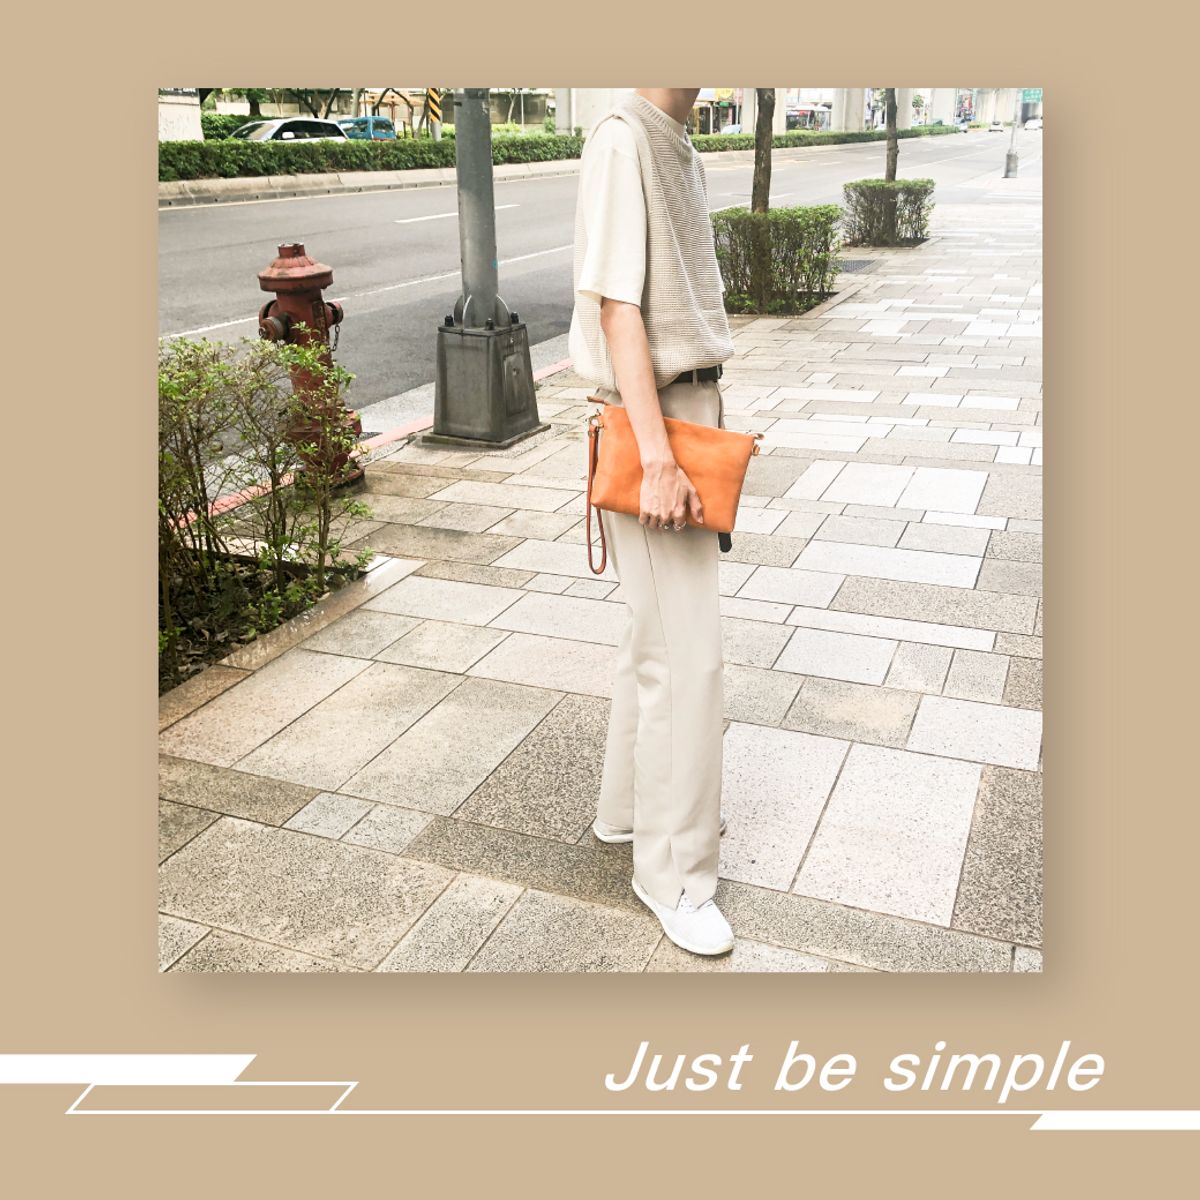 /Just be simple